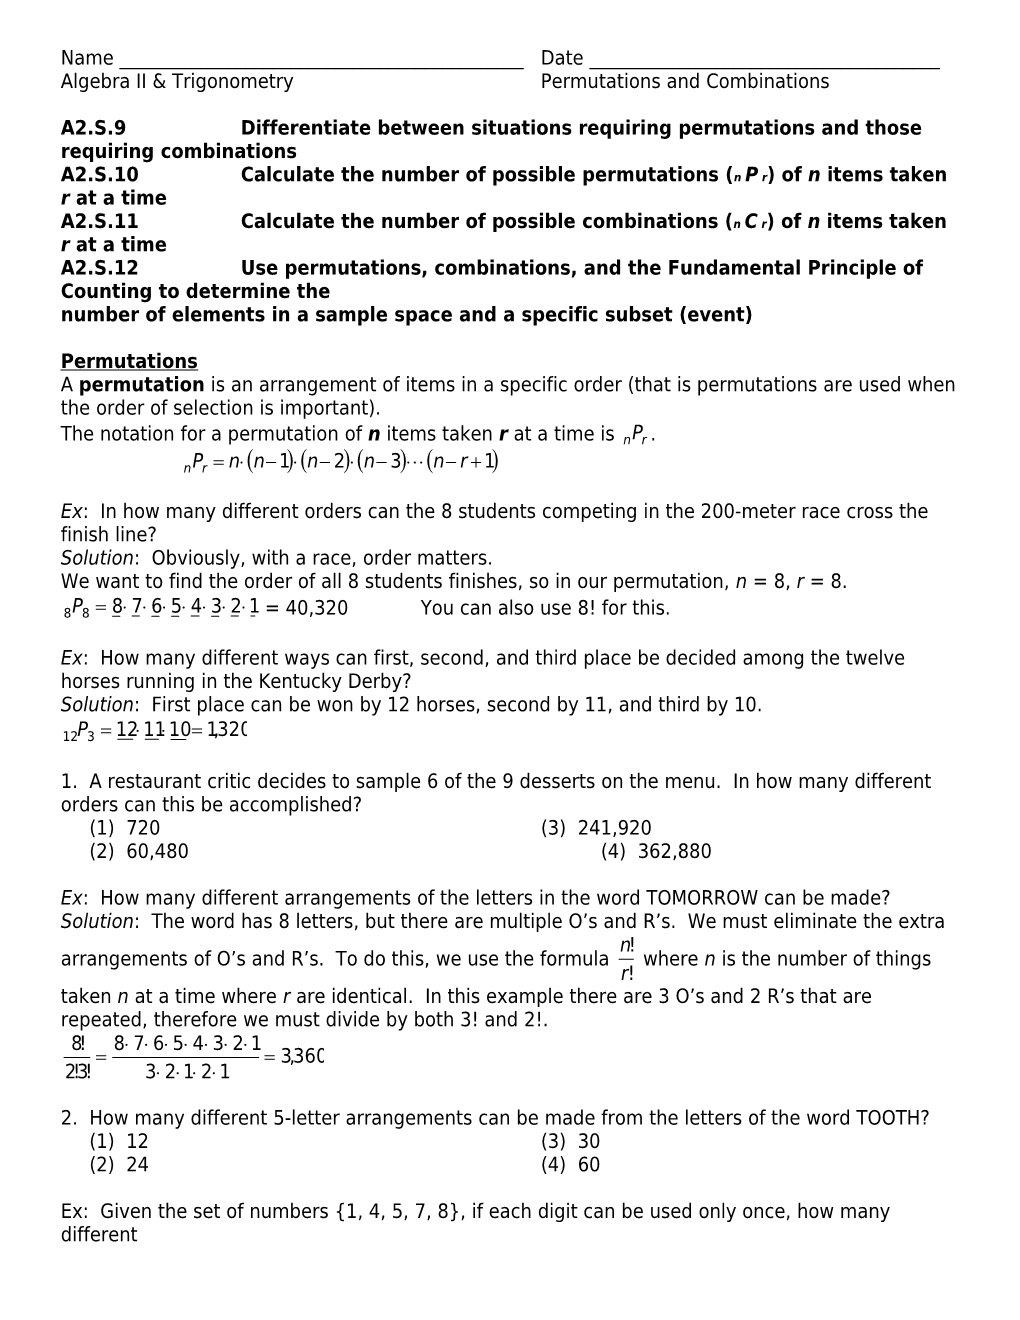 A2.S.9Differentiate Between Situations Requiring Permutations and Those Requiring Combinations